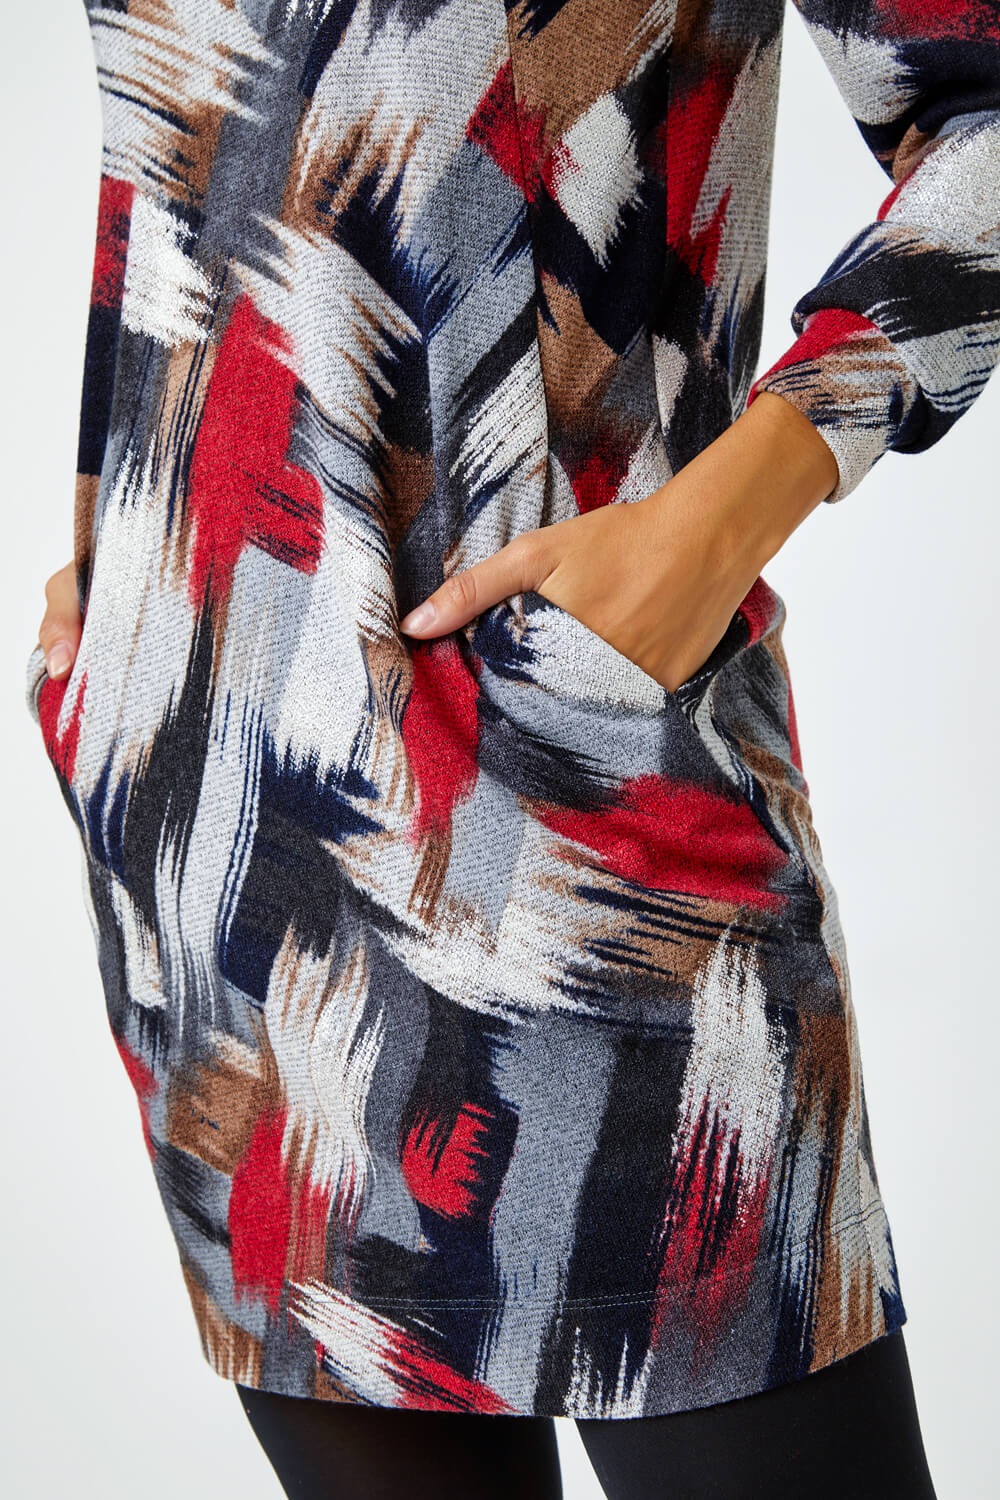 Red Cowl Neck Abstract Print Stretch Dress, Image 5 of 5